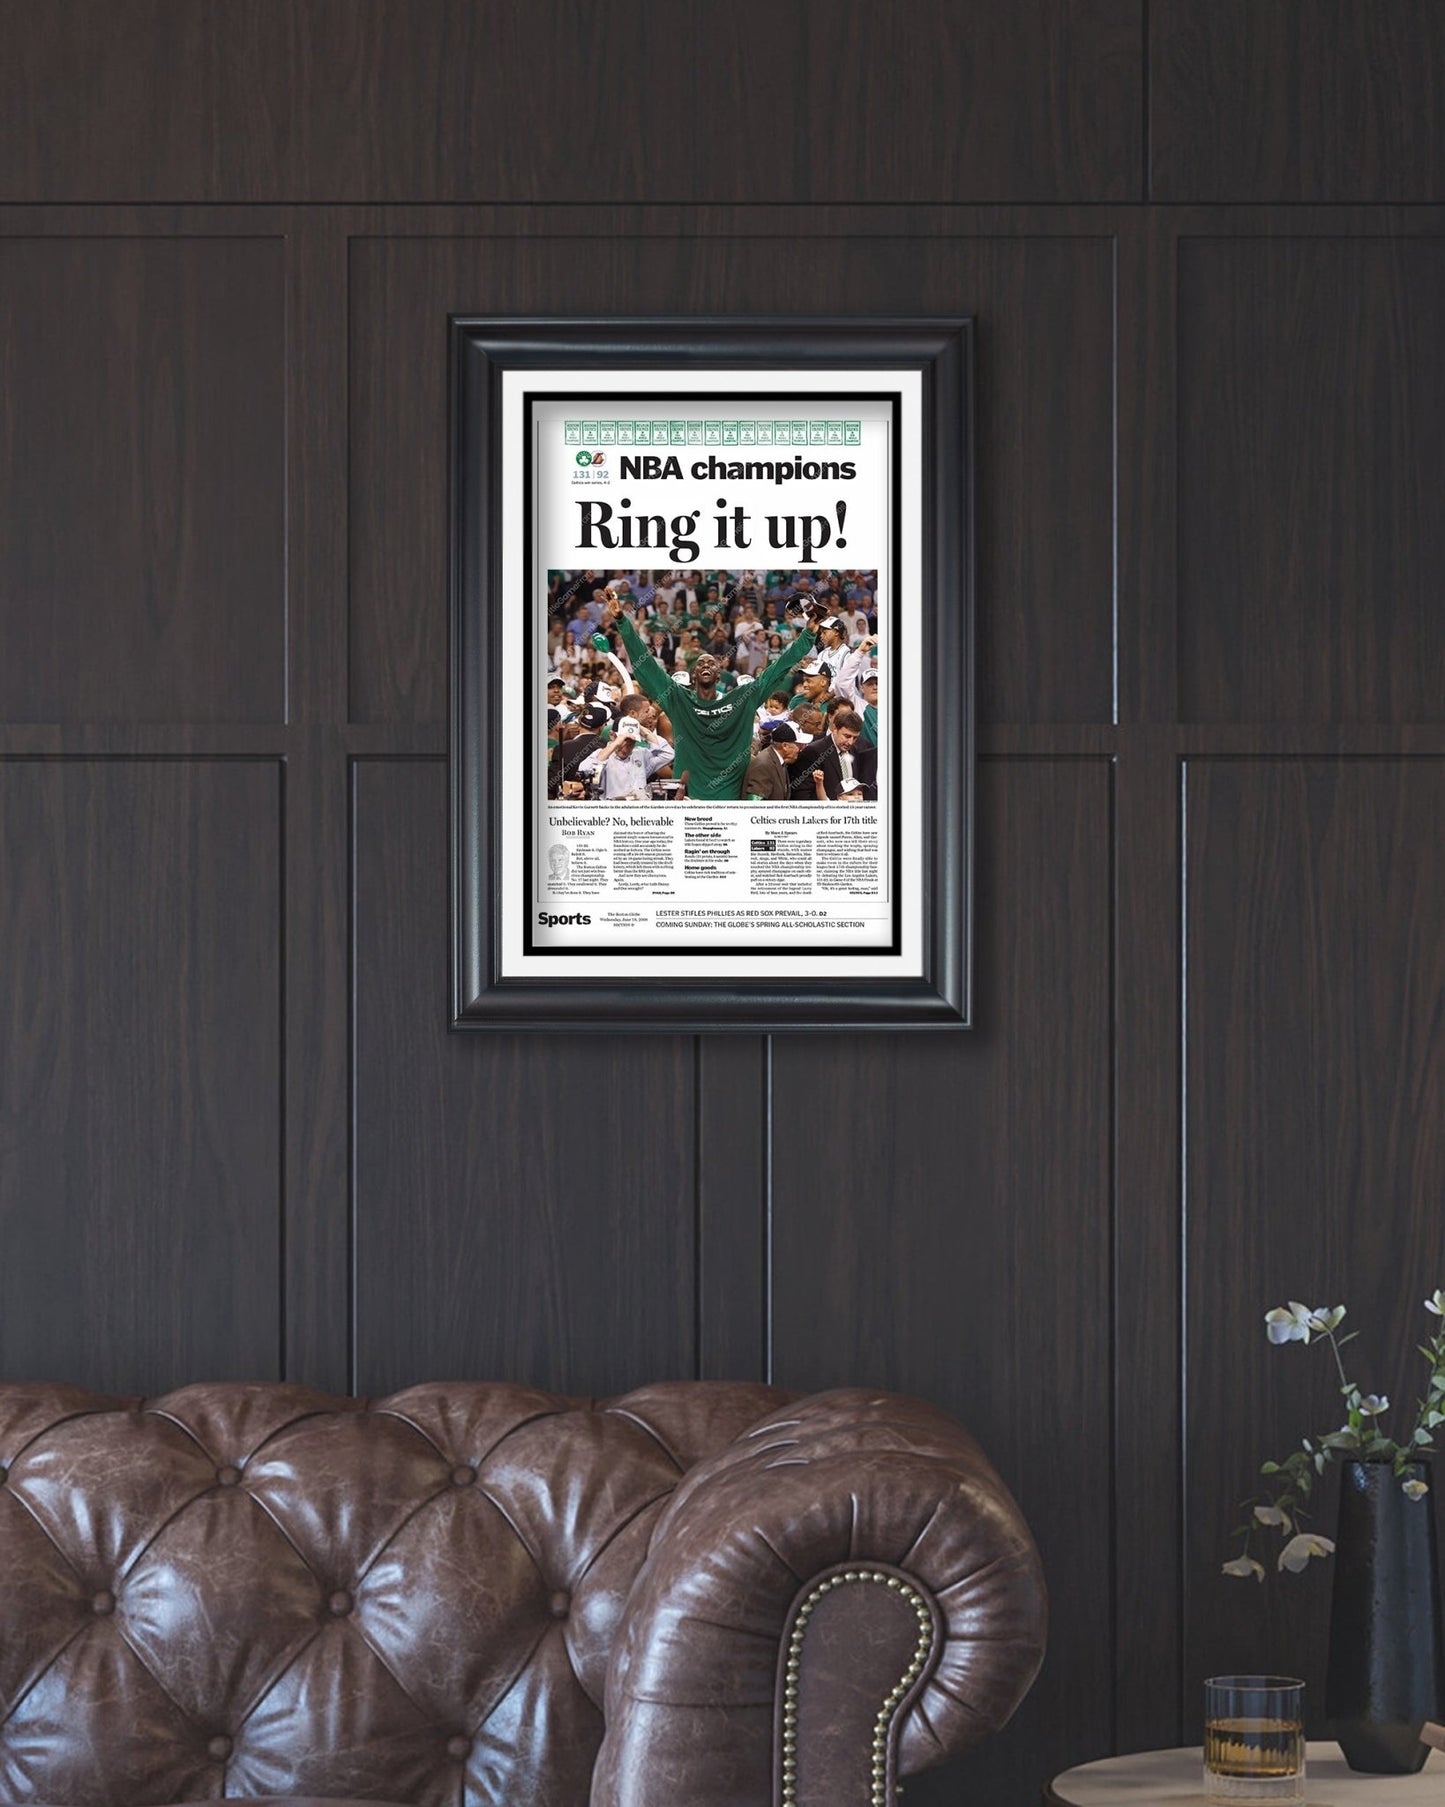 2008 Boston Celtics NBA Champions 'Ring it up!' Framed Newspaper Front Page Print - Title Game Frames